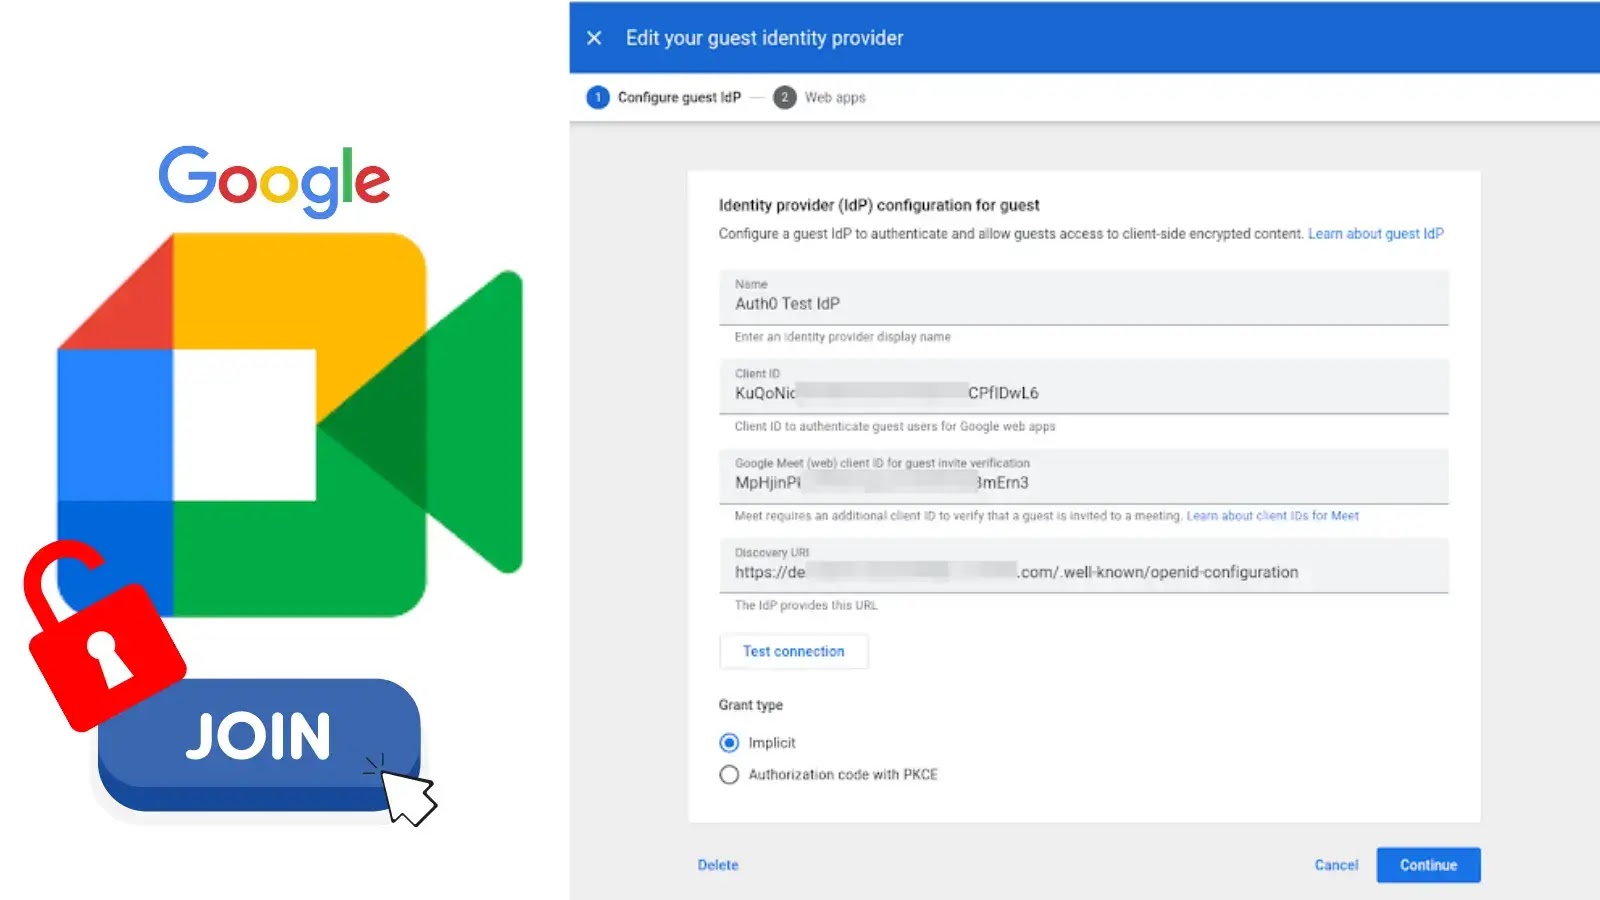 Google Meet Now Allows Non-Google Account Users to Join Encrypted Calls